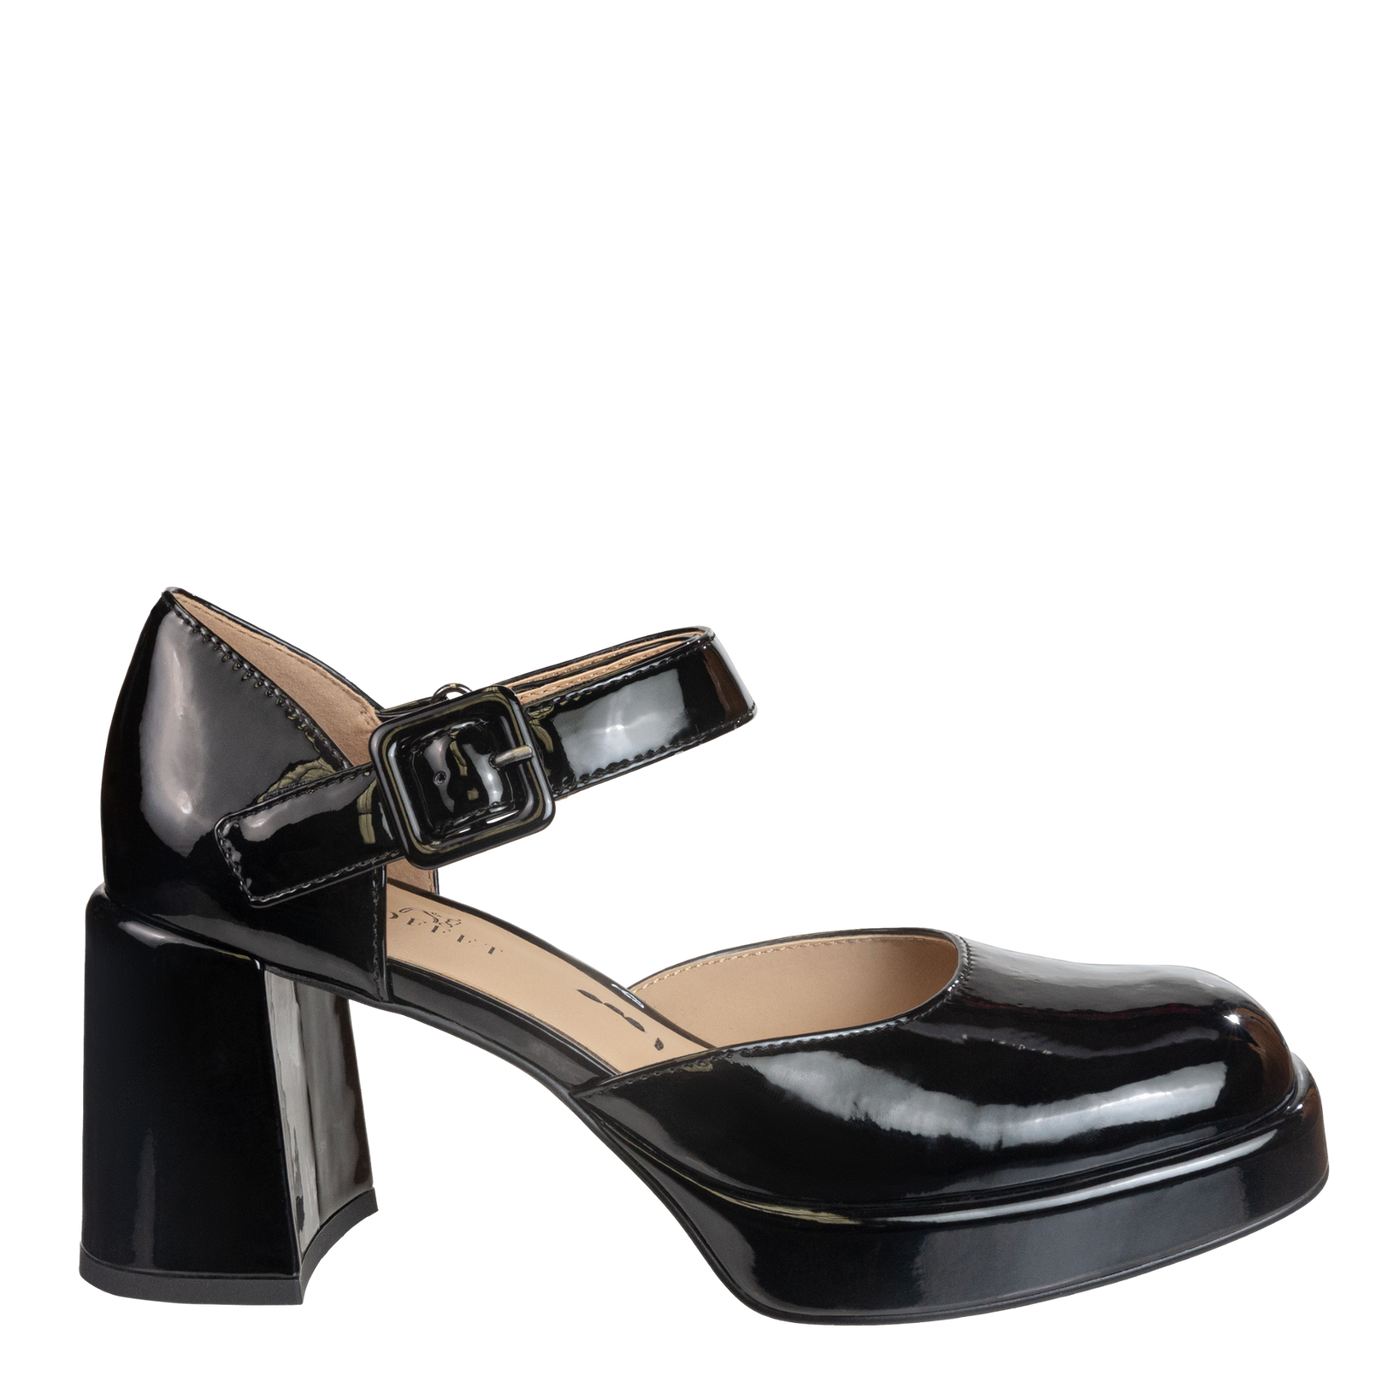 NAKED FEET - ESTONIA in BLACK PATENT Heeled Clogs-WOMEN FOOTWEAR- Corner Stone Spa and Salon Boutique in Stoughton, Wisconsin